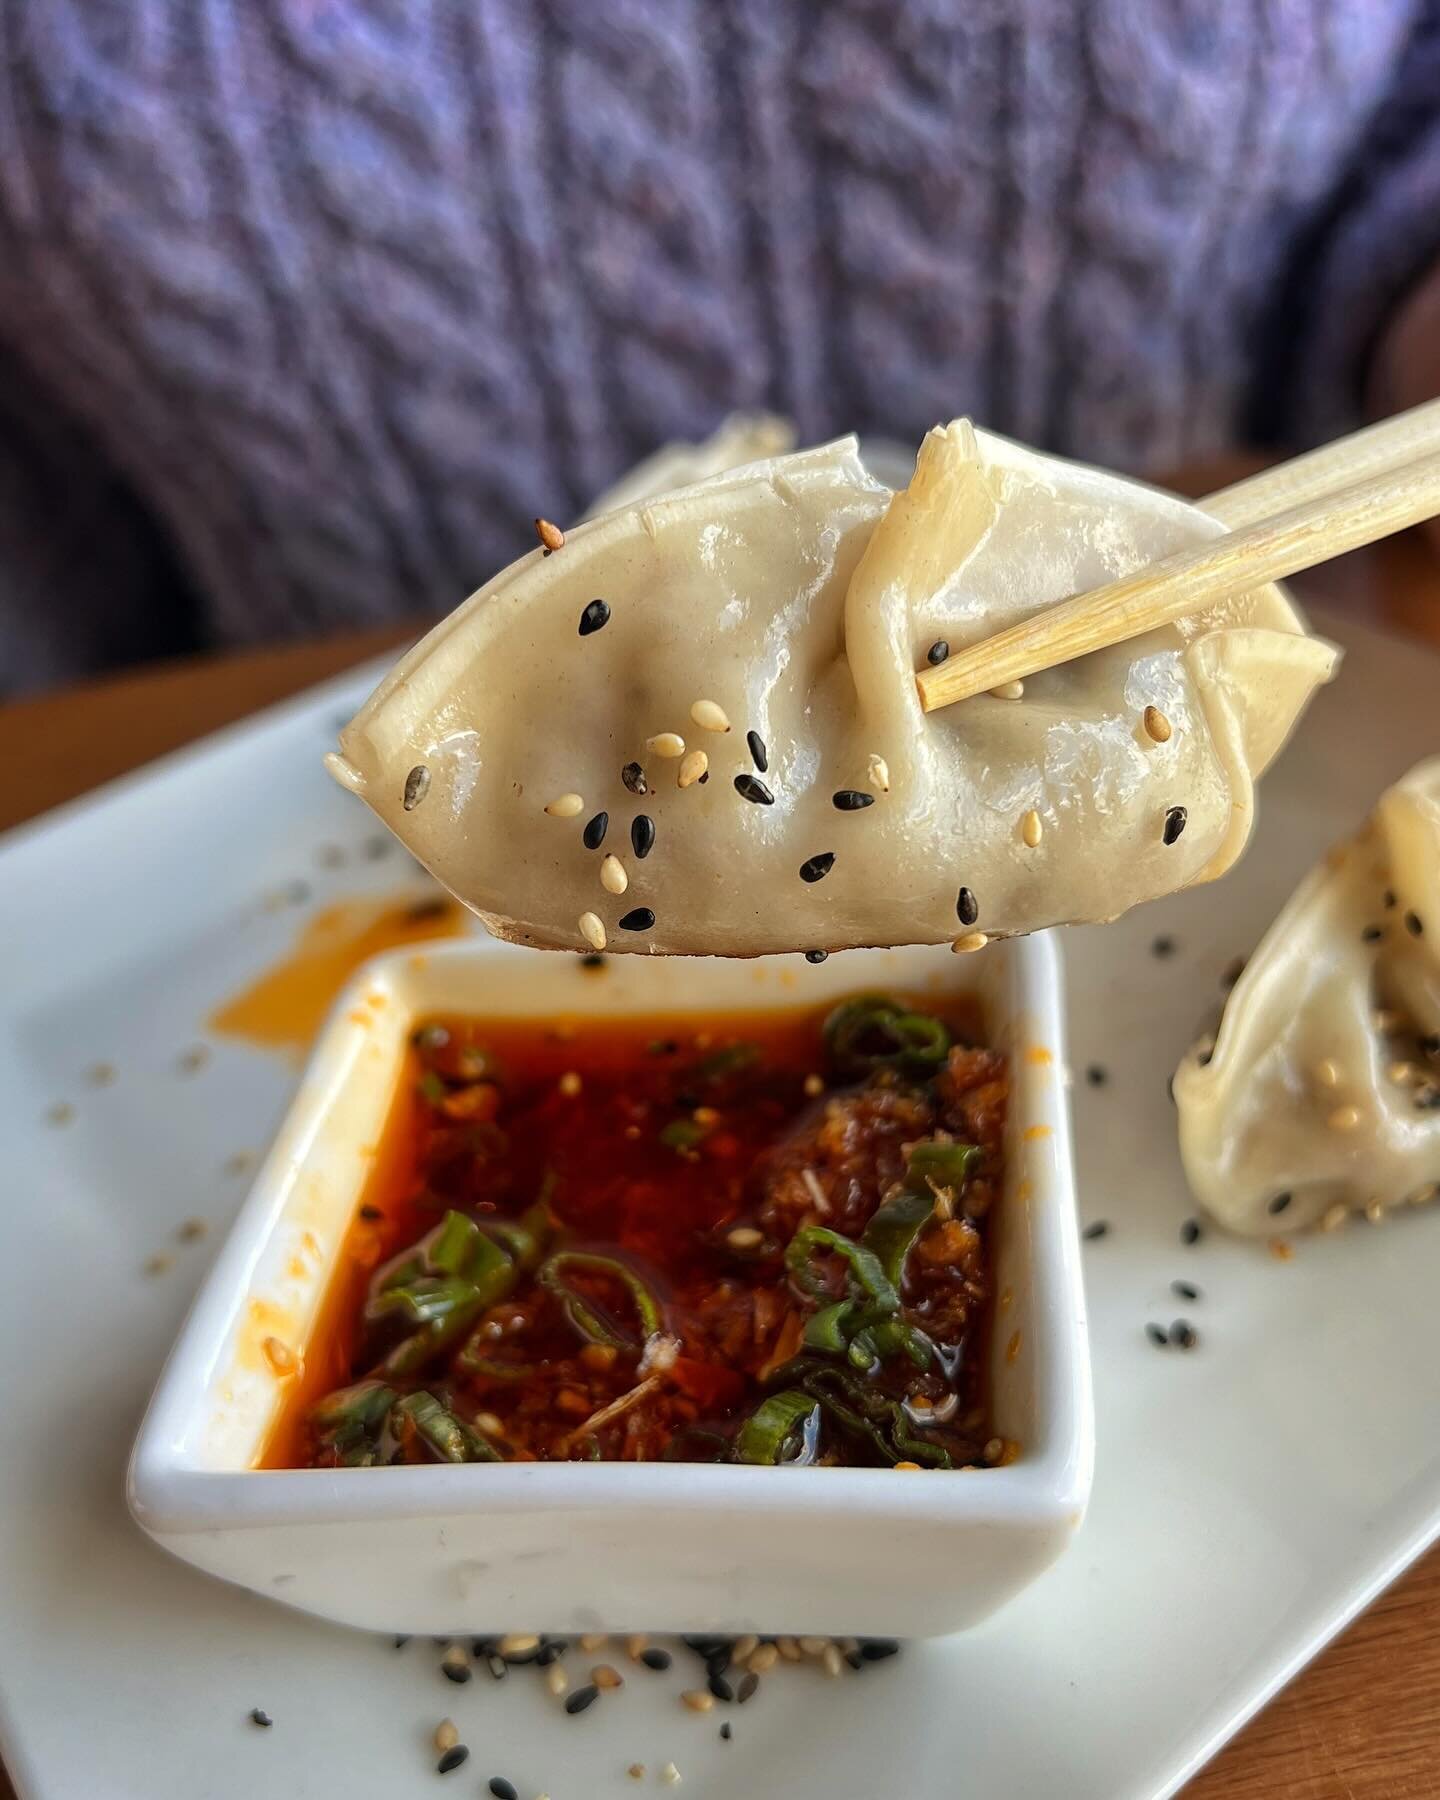 Satisfy your vegan cravings with our delicious DUMPLINGS! 🥟😋🥟
#ROGUEPANDA #NYC
📍ROOFTOP LEVEL at @timeoutmarket!
🧋 Visit our sister restaurant @the.rogue.boba!